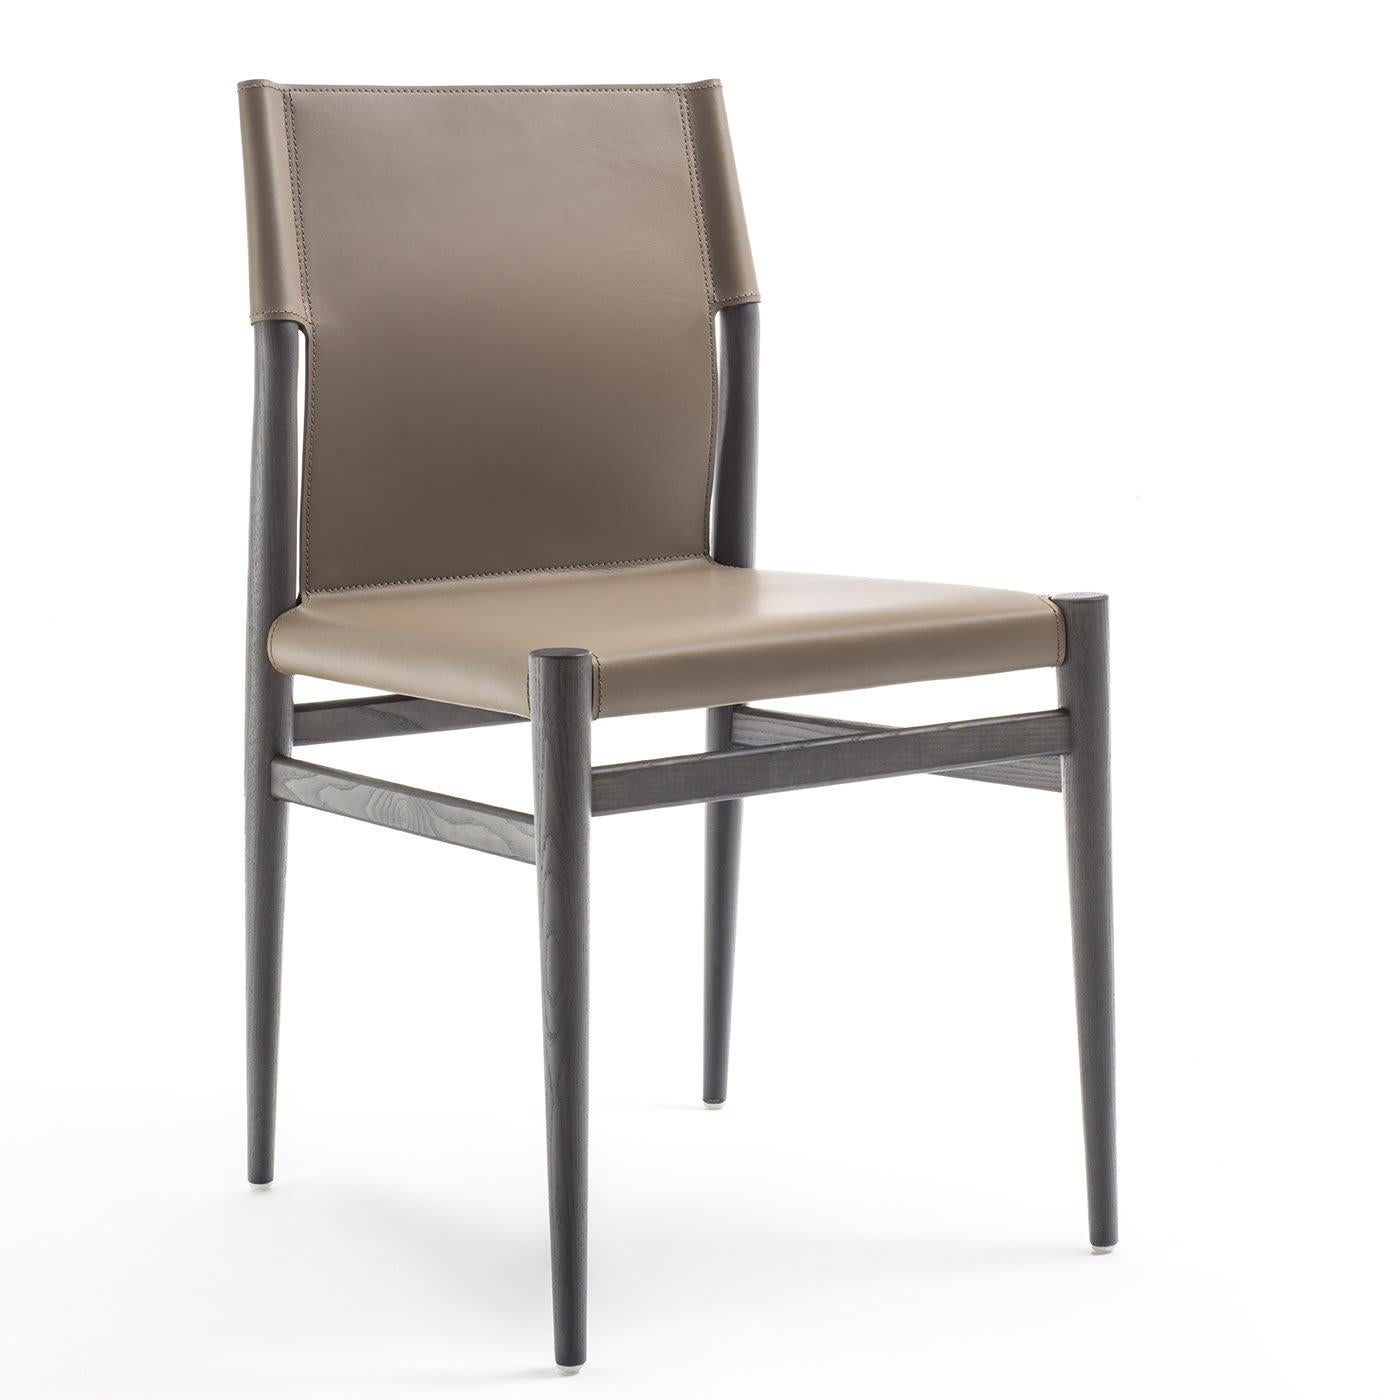 The Ledermann chair's seat and back are joined and completely covered in taupe-colored leather. The frame and four tapered, conical legs are made from gray ash wood. Its sturdy, sharp-cornered minimalism is reminiscent of Scandinavian design. An